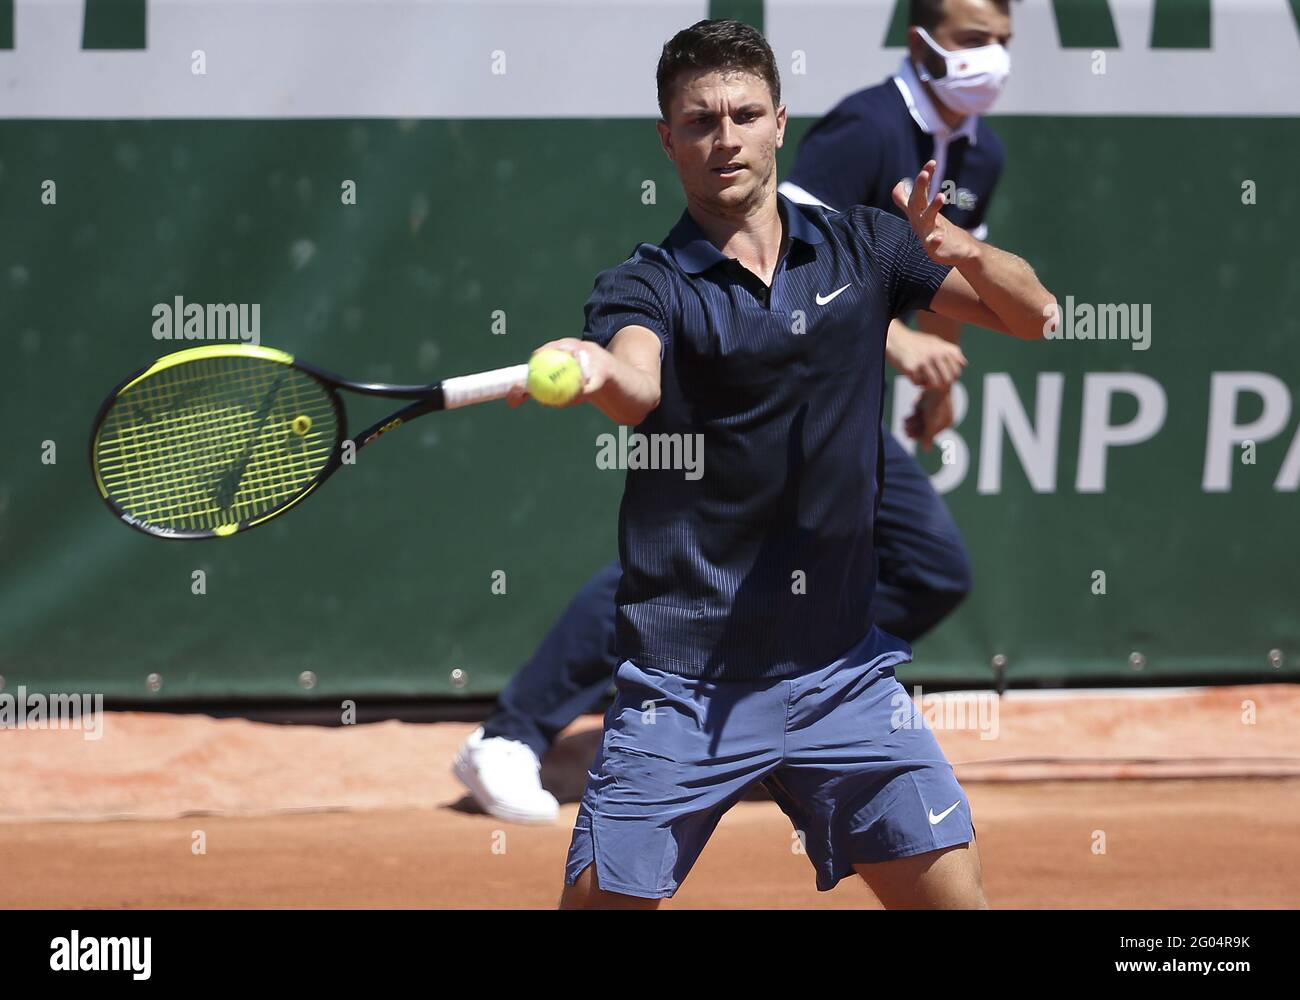 Miomir Kecmanovic of Serbia during day 1 of the French Open 2021, a Grand Slam tennis tournament on May 30, 2021 at Roland-Garros stadium in Paris, France